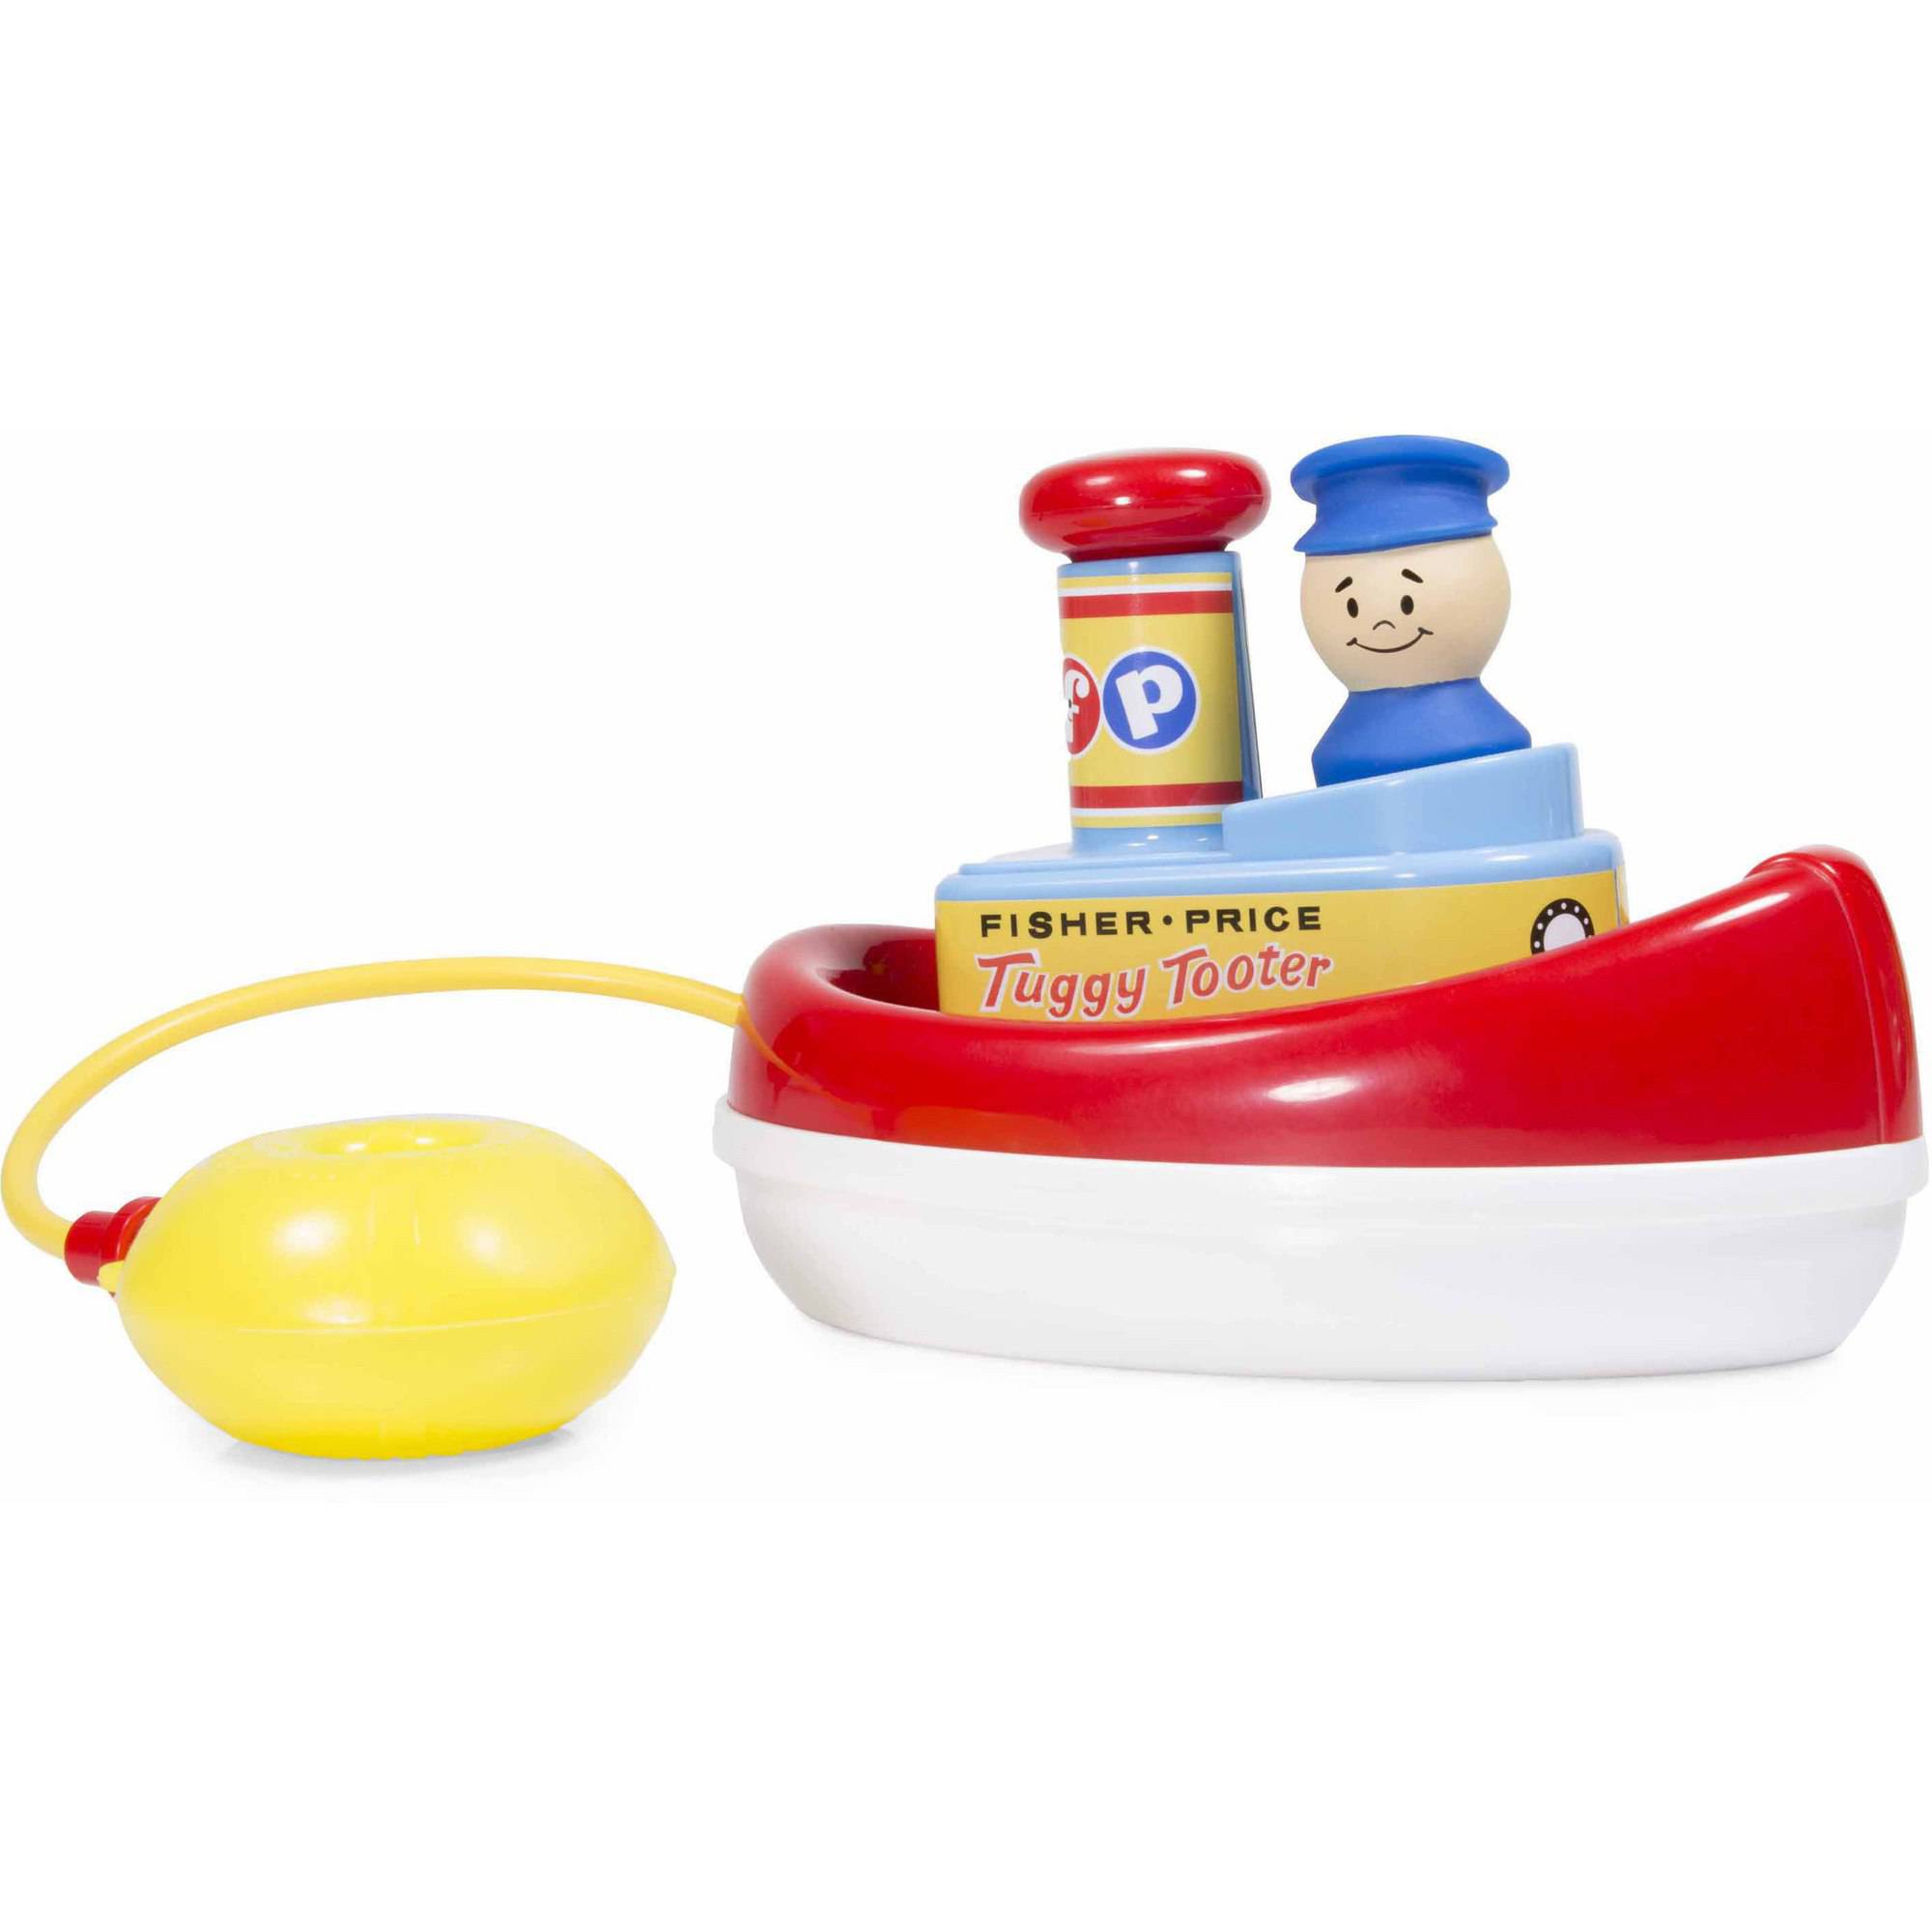 Fisher Price Classics Fisher-Price Tuggy Tooter - ANB Baby -bath toy